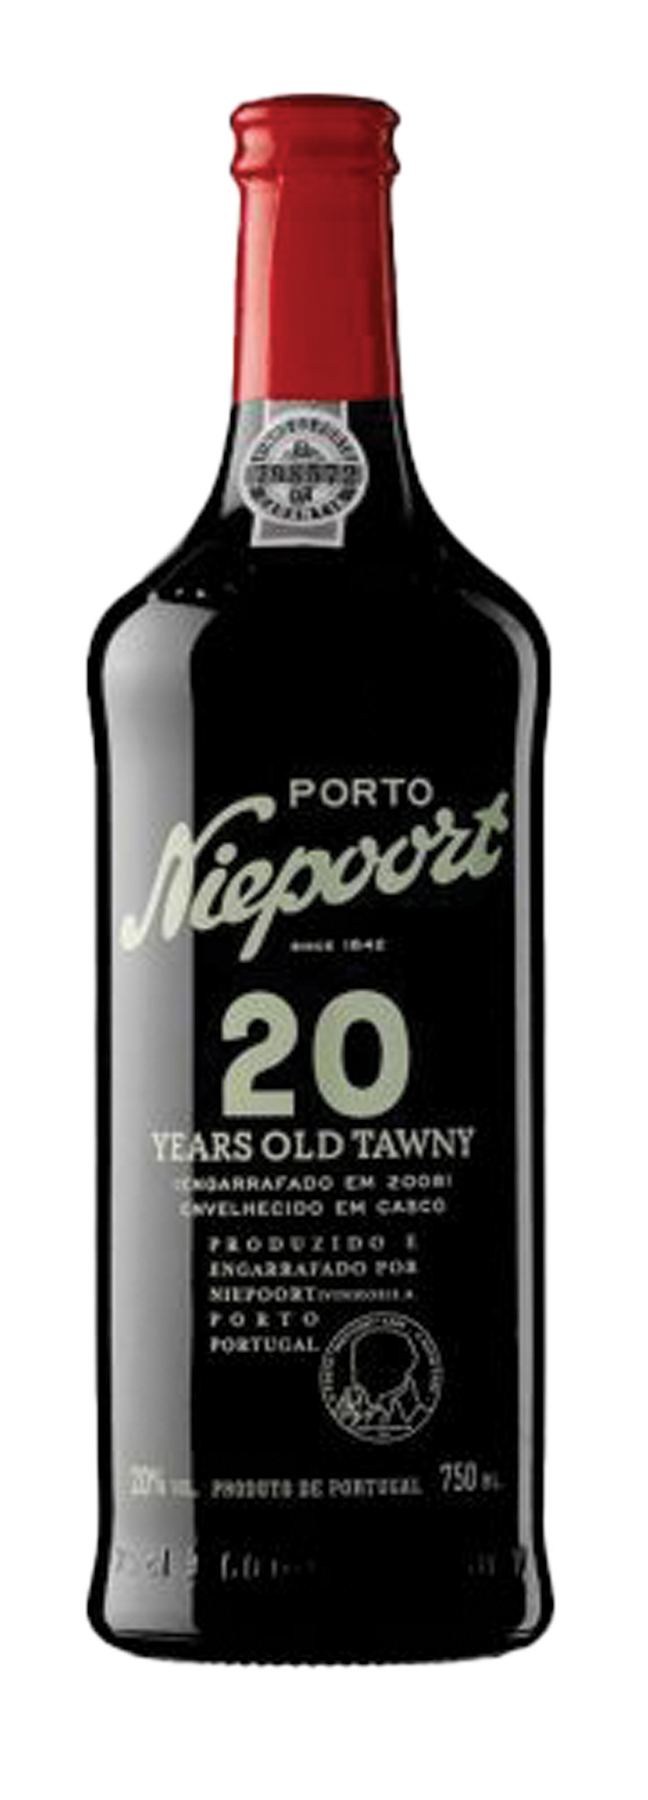 Niepoort 20 Years Old Tawny 20% 75cl